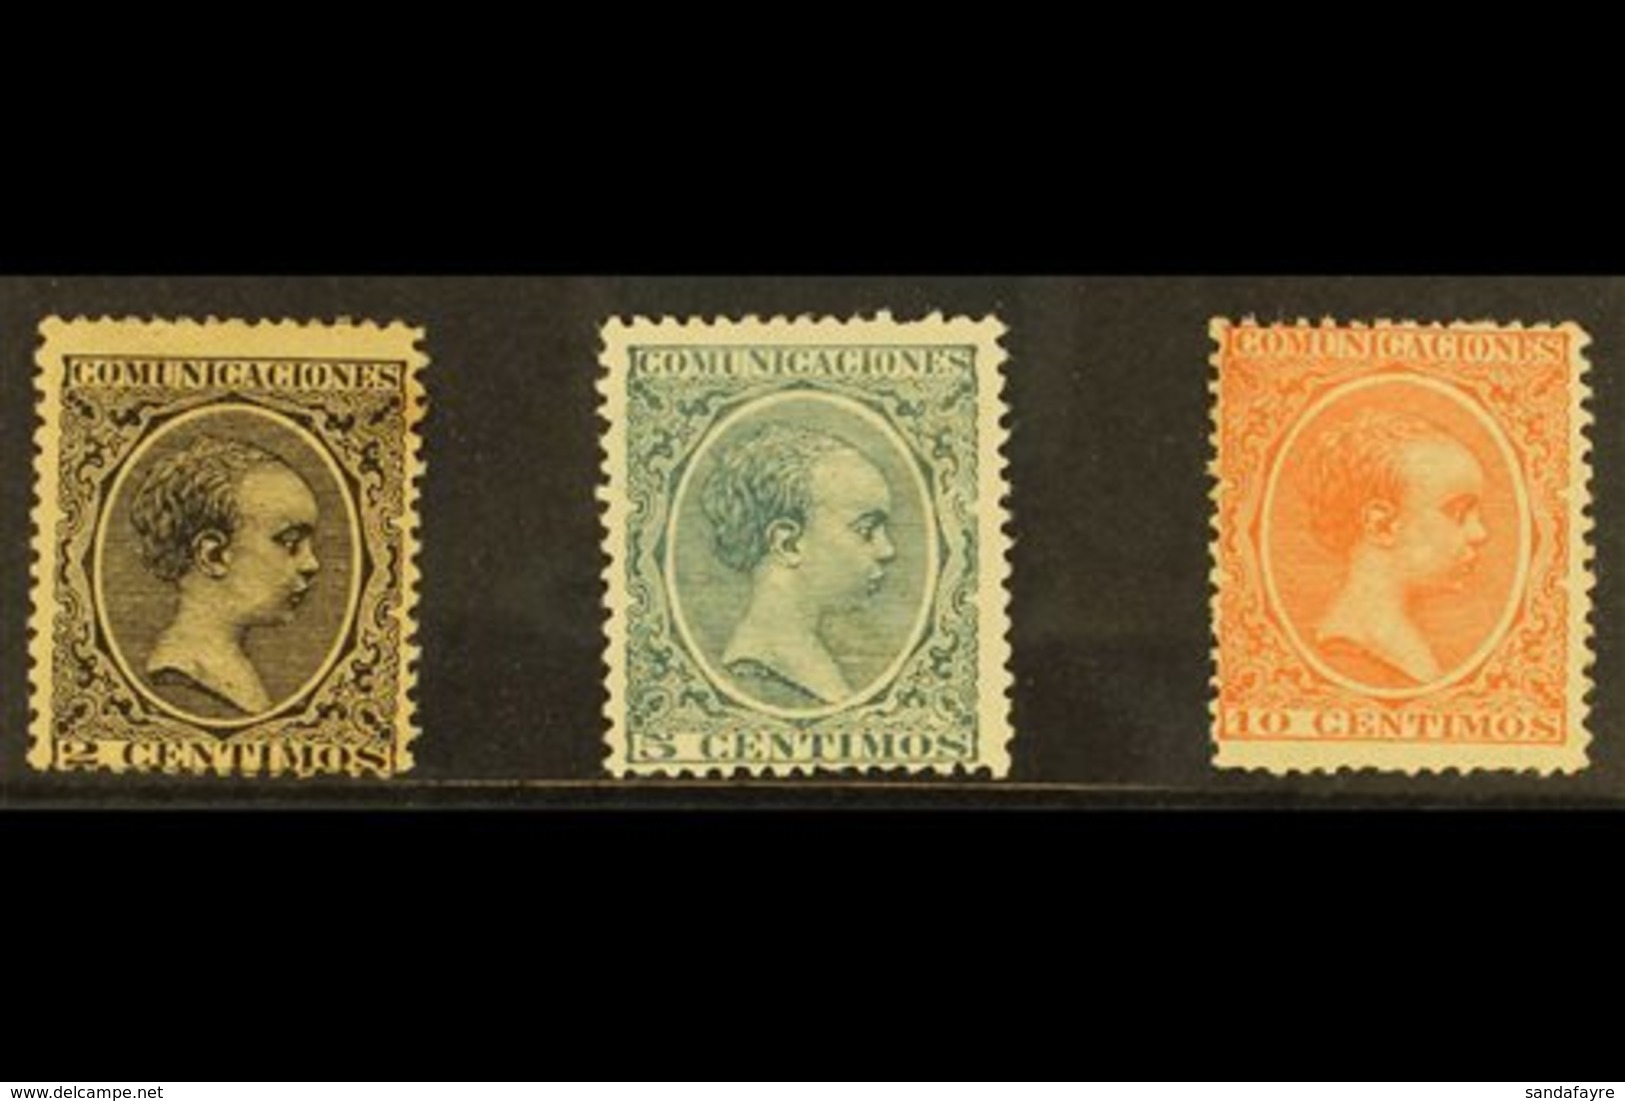 1899 Alphonso "New Colours" Set, SG 289/291, Mint, The 2c With Gum Toning, But The 5c Deep Bluish-green And 10c Orange-r - Other & Unclassified